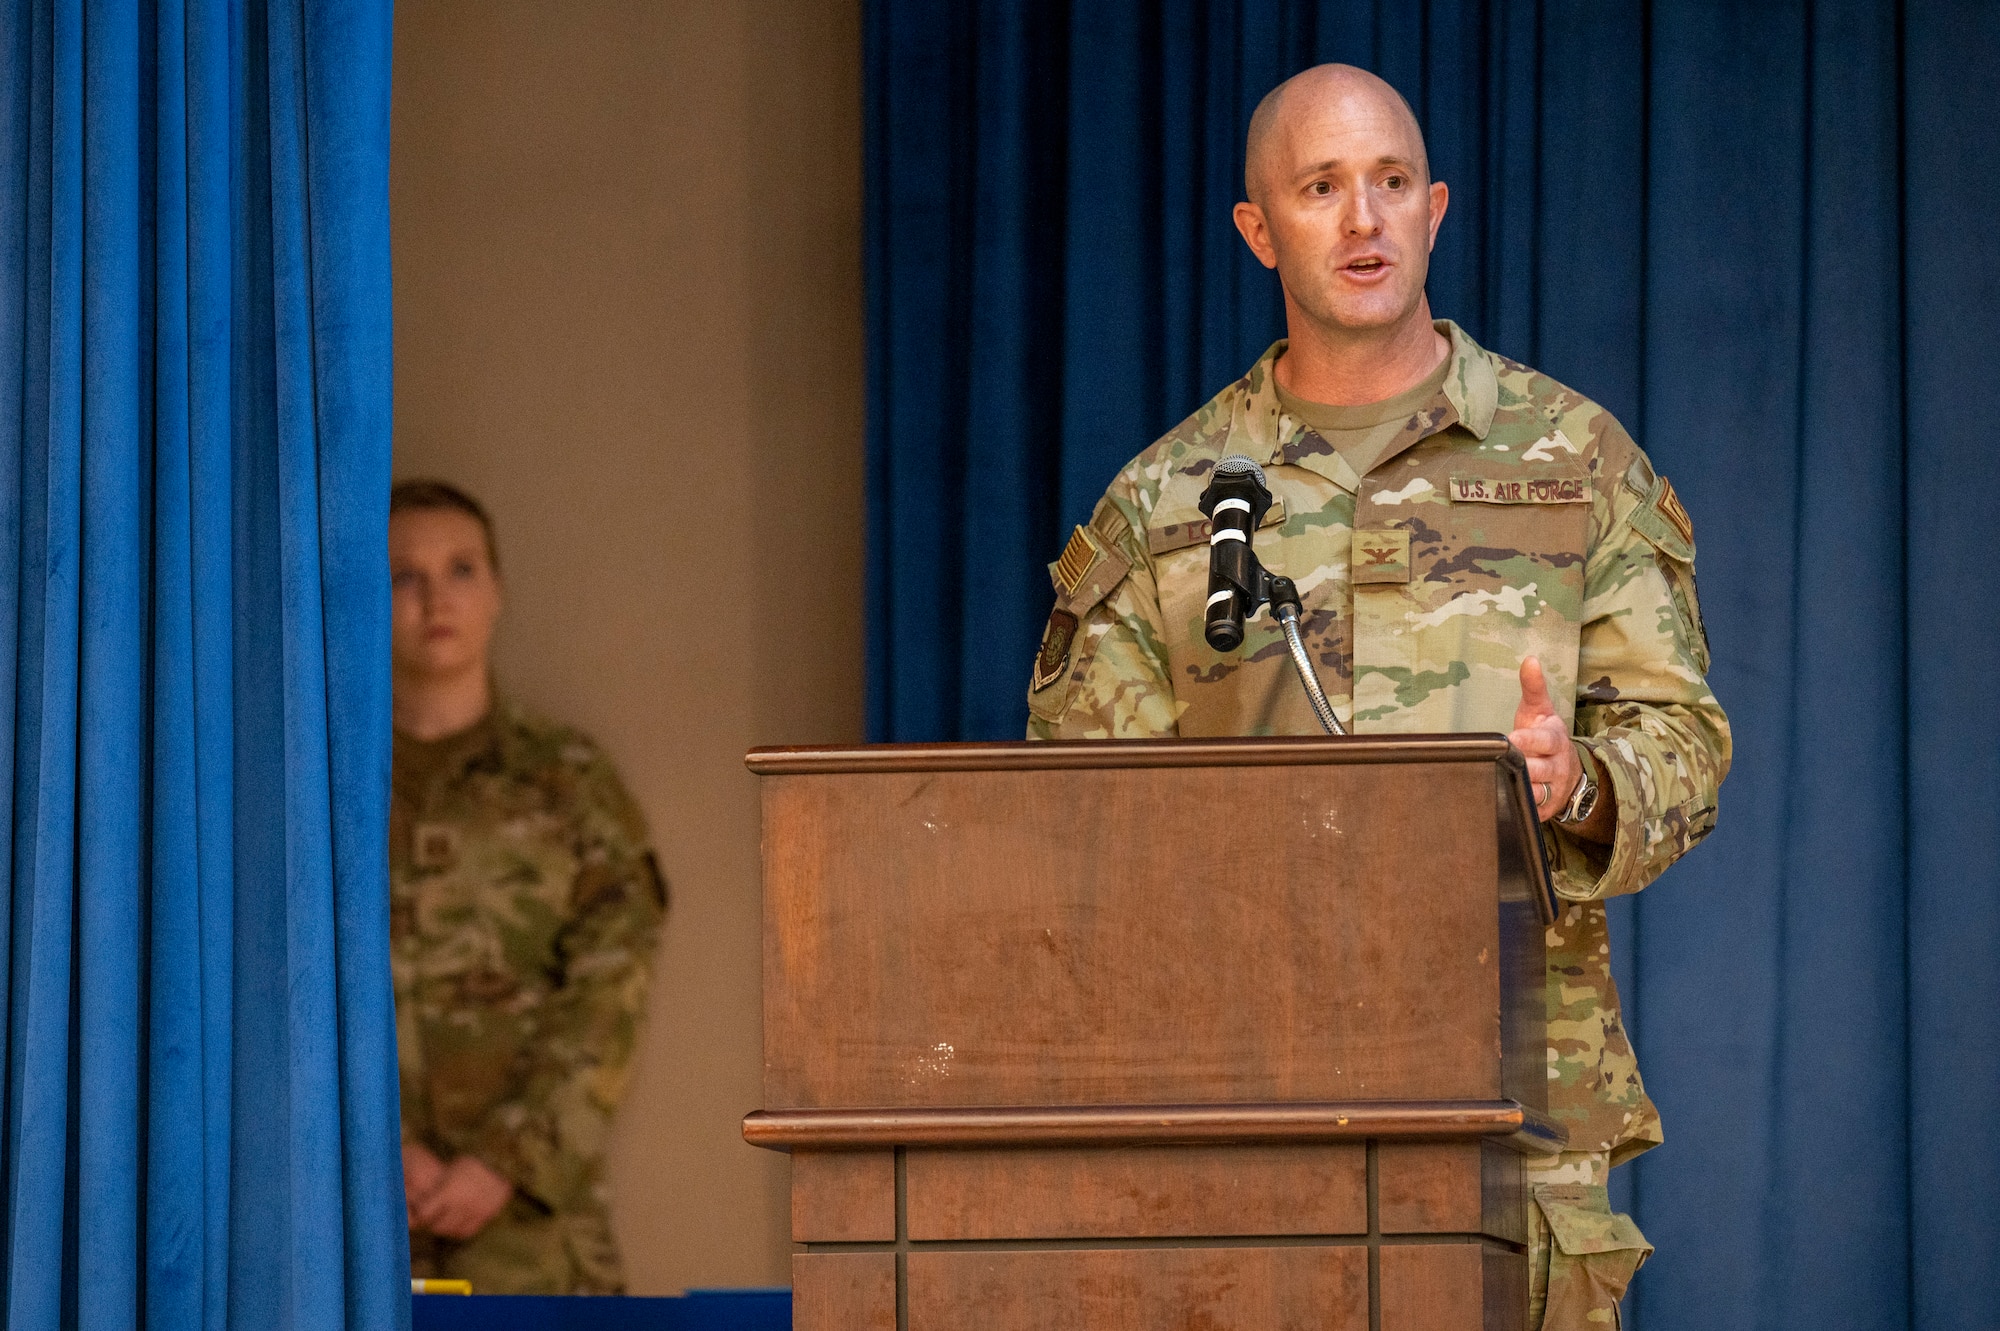 U.S. Air Force Col. Patrick Lowe, 607th Air Support Operations Group incoming commander, gives his first speech to his group during a change of command ceremony at Osan Air Base, Republic of Korea, June 26, 2023. Change of command ceremonies are time-honored traditions deeply-rooted in American military history. (U.S. Air Force photo by Senior Airman Aaron Edwards)